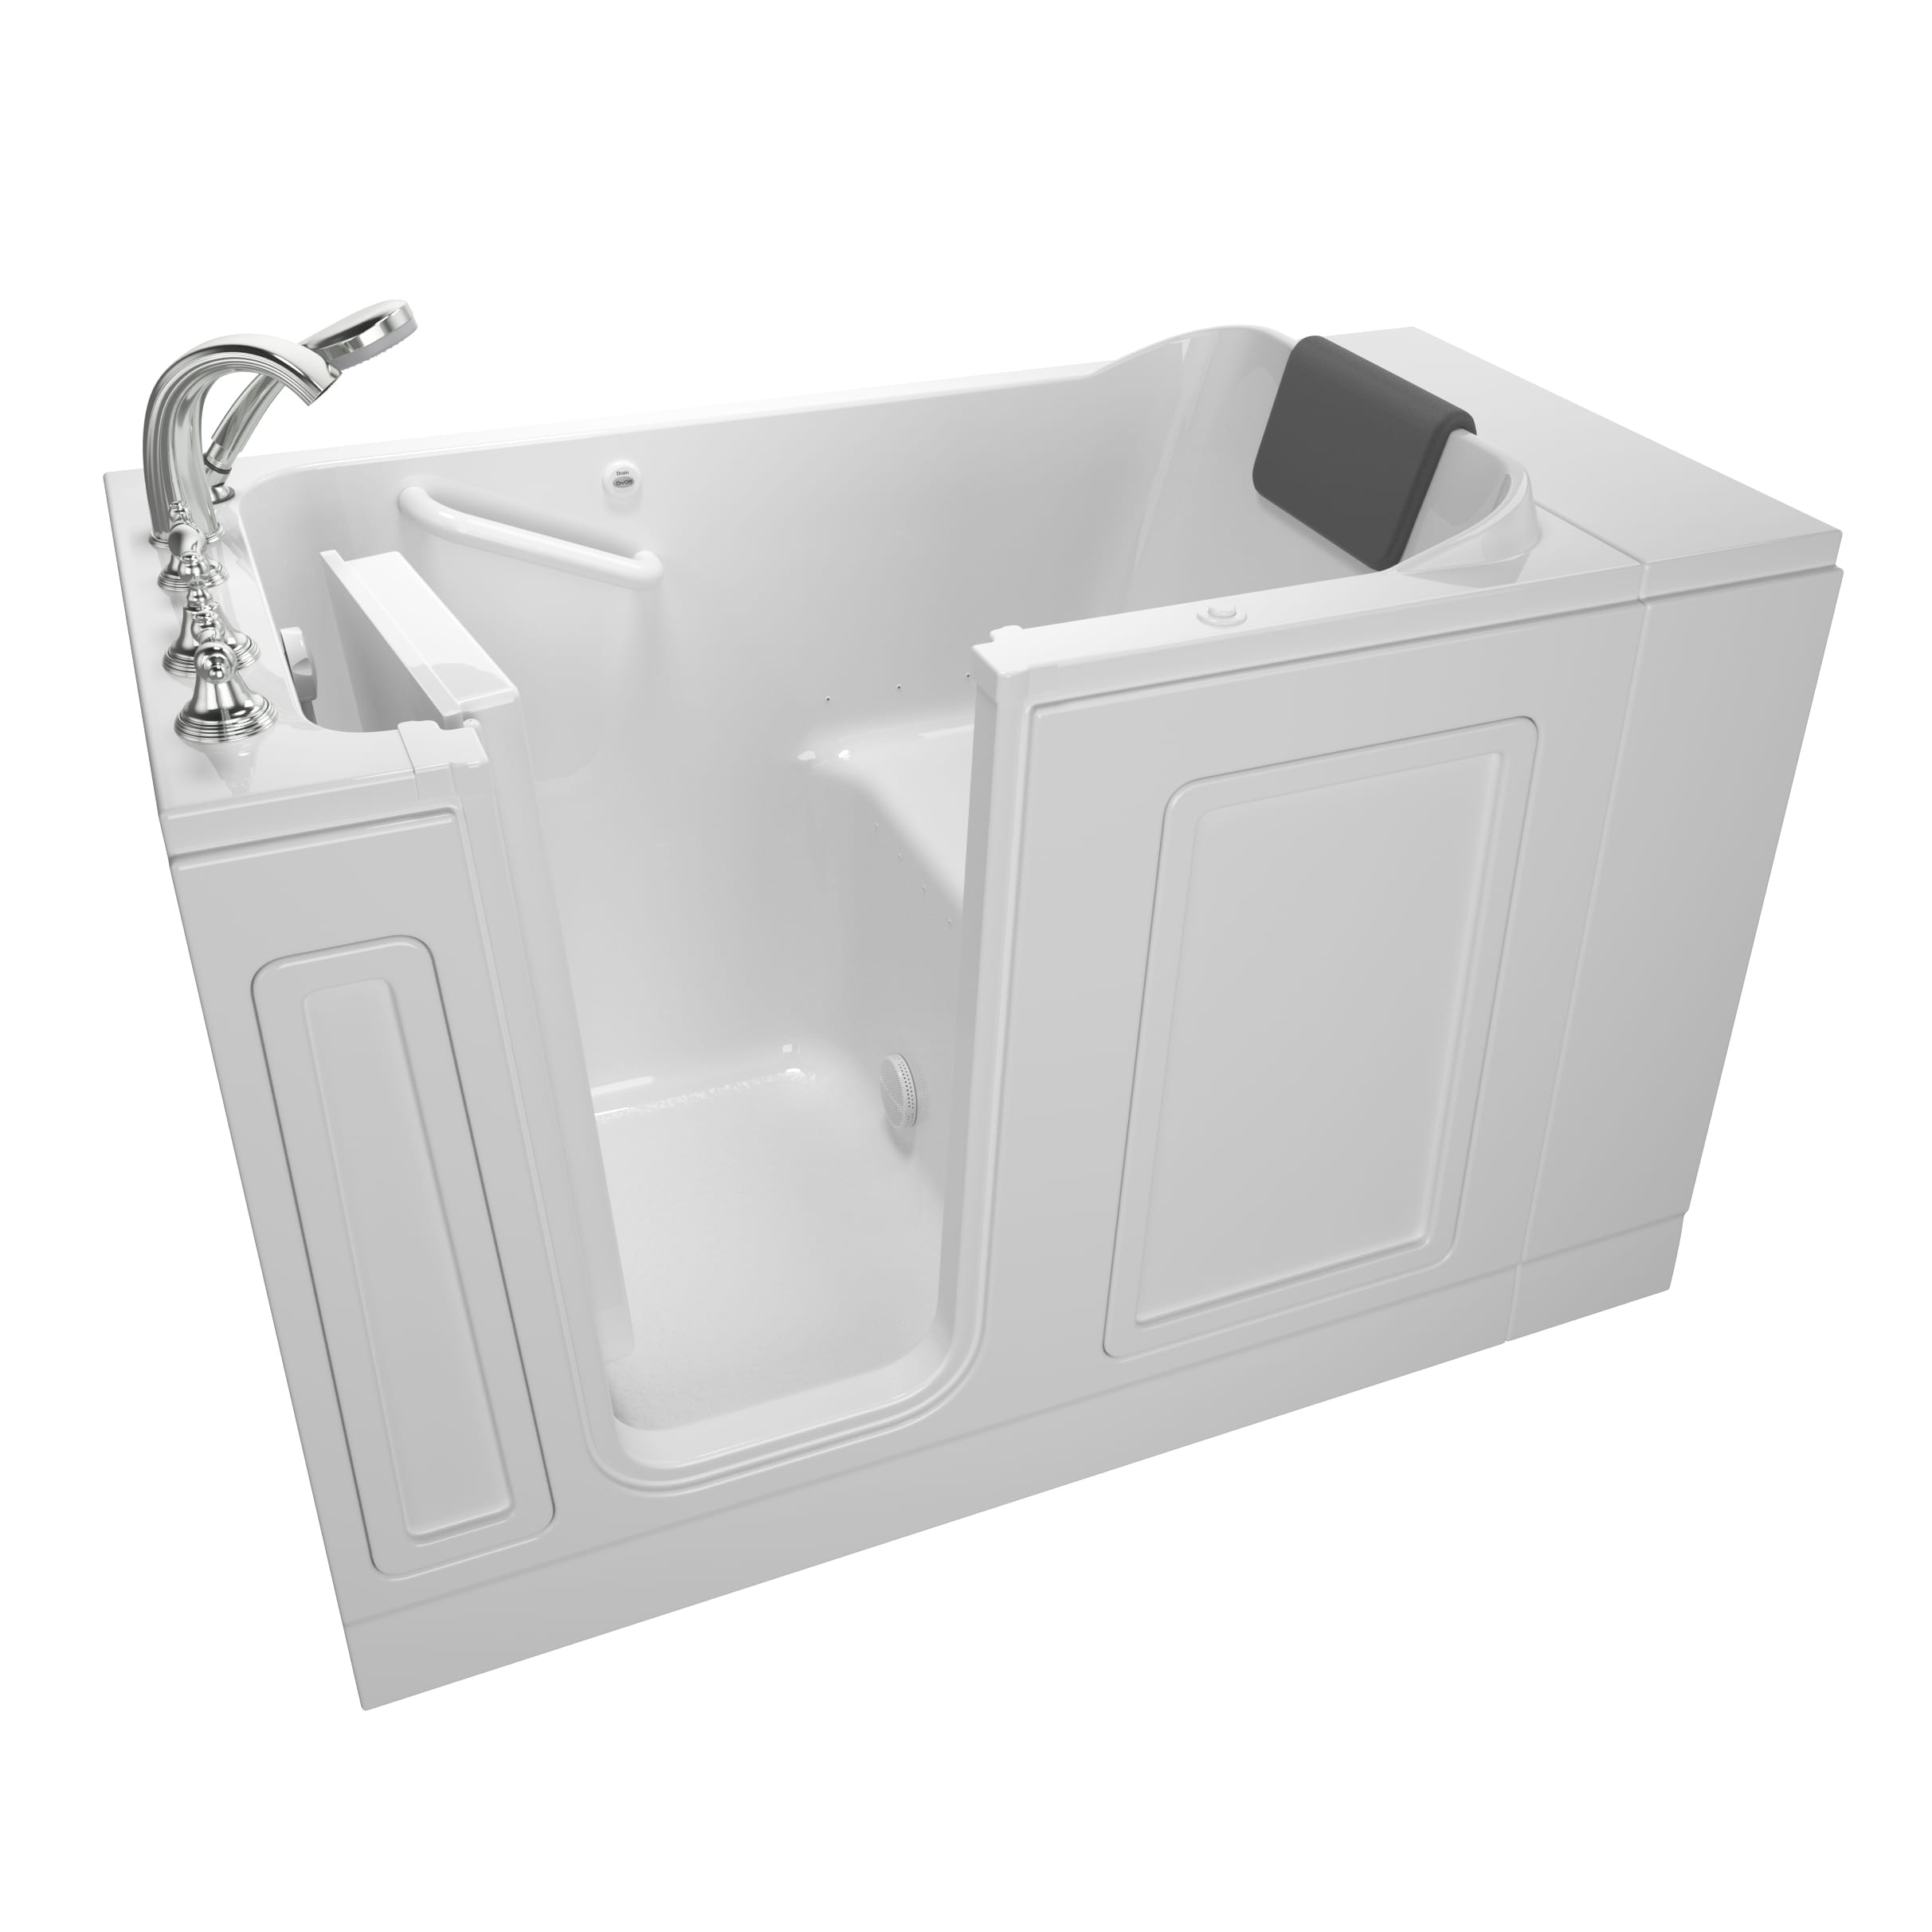 Acrylic Luxury Series 30 x 51  Inch Walk in Tub With Air Spa System   Left Hand Drain With Faucet WIB WHITE